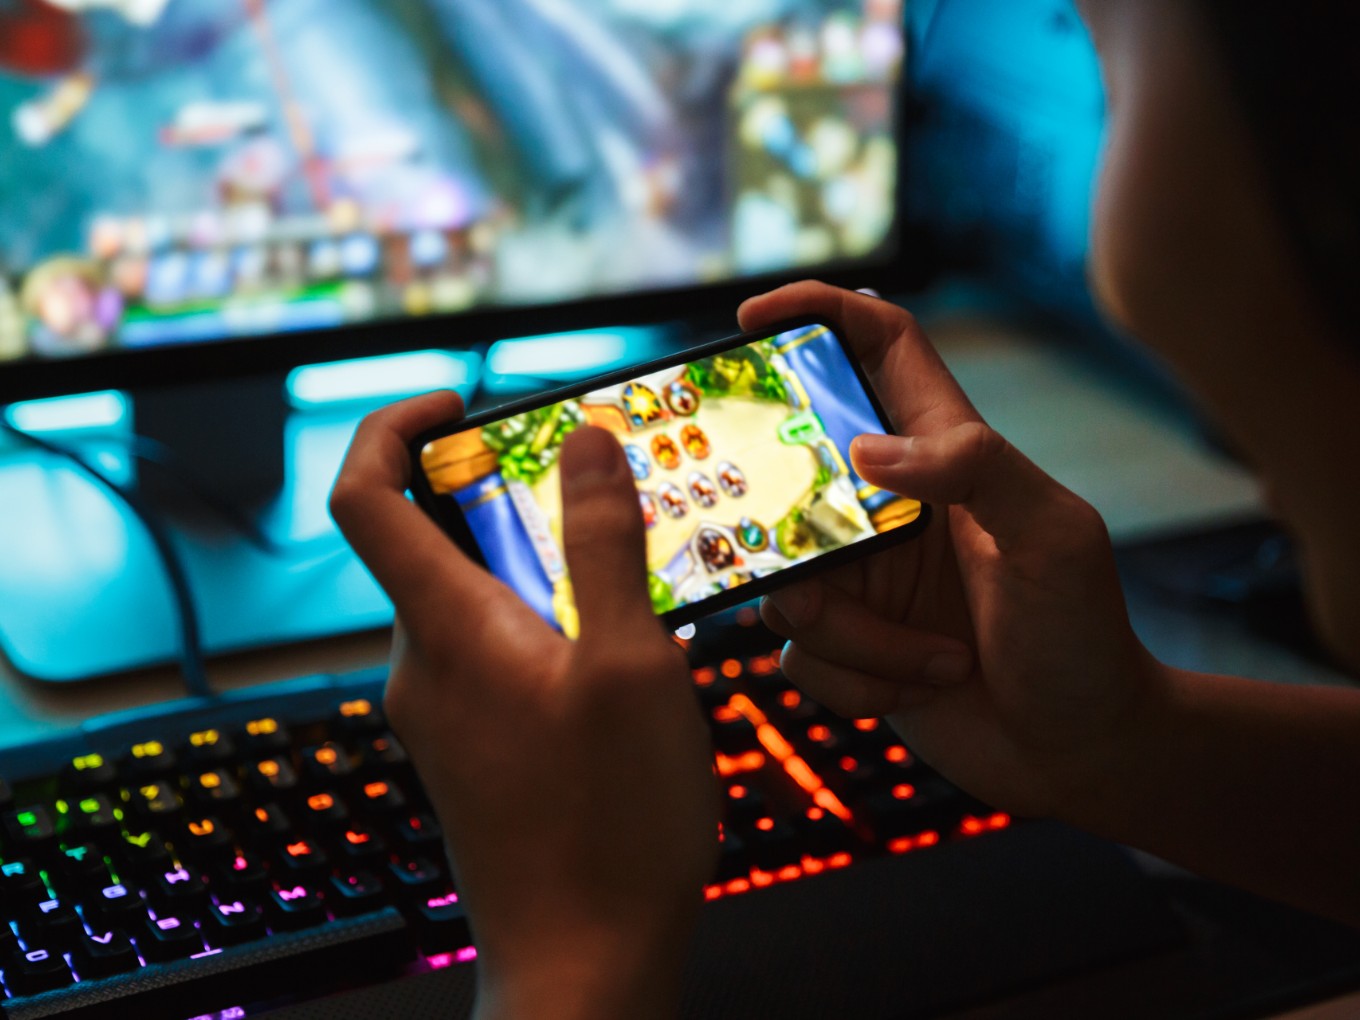 Online Gaming: Is this a problem for my child? - Cyber Safety Consulting